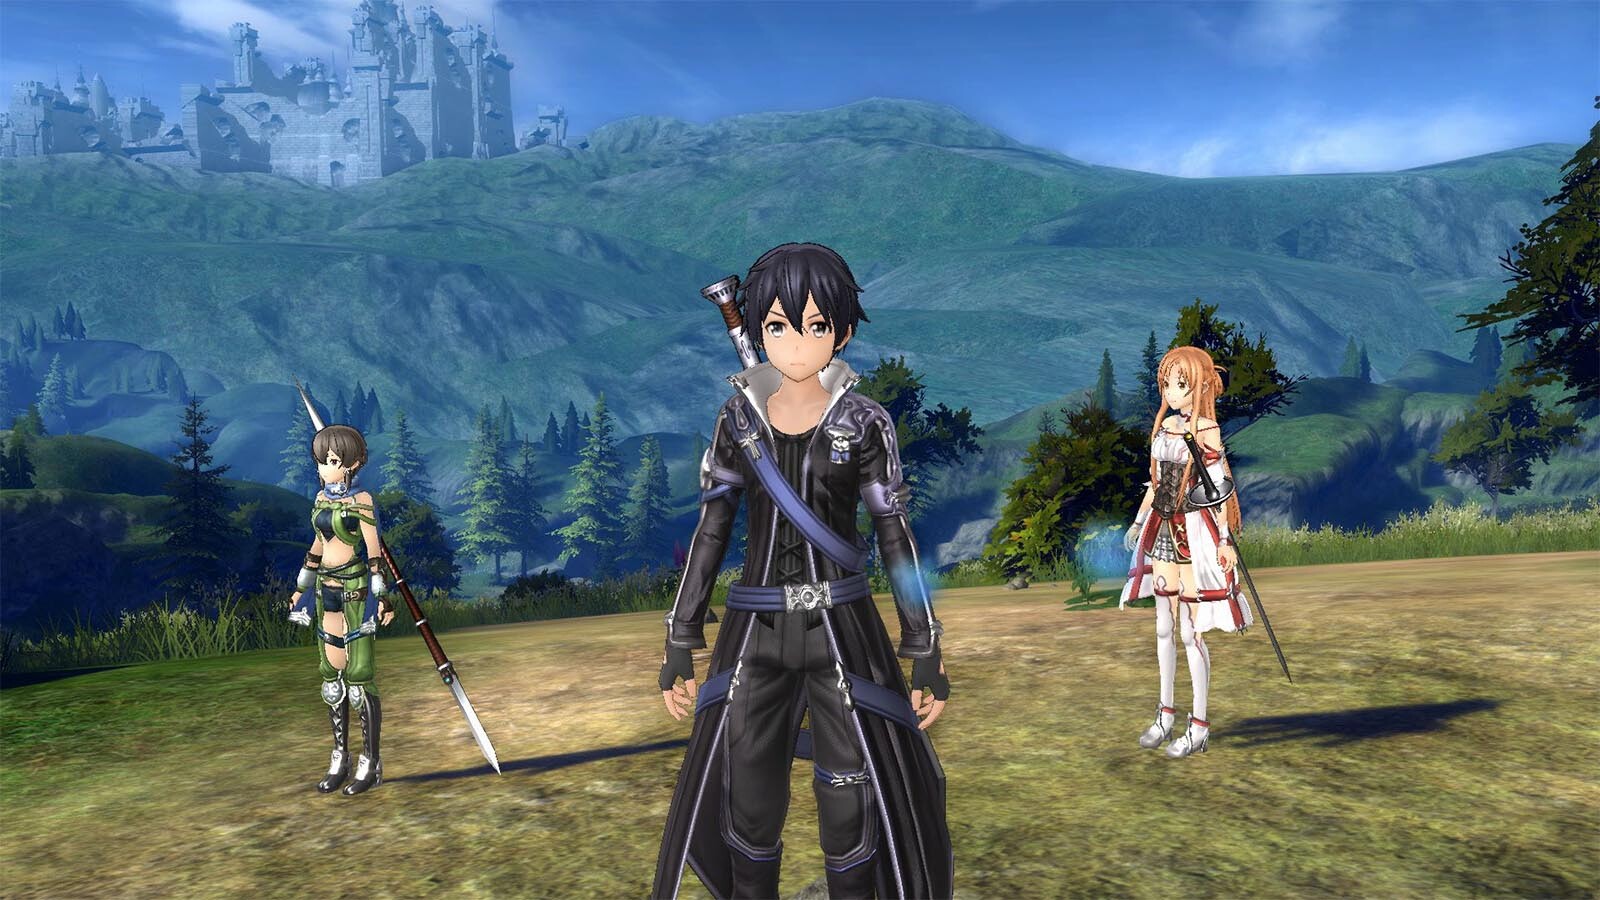 SWORD ART ONLINE: HOLLOW REALIZATION Digital Full Game Bundle [PC] - GAME  OF THE YEAR EDITION